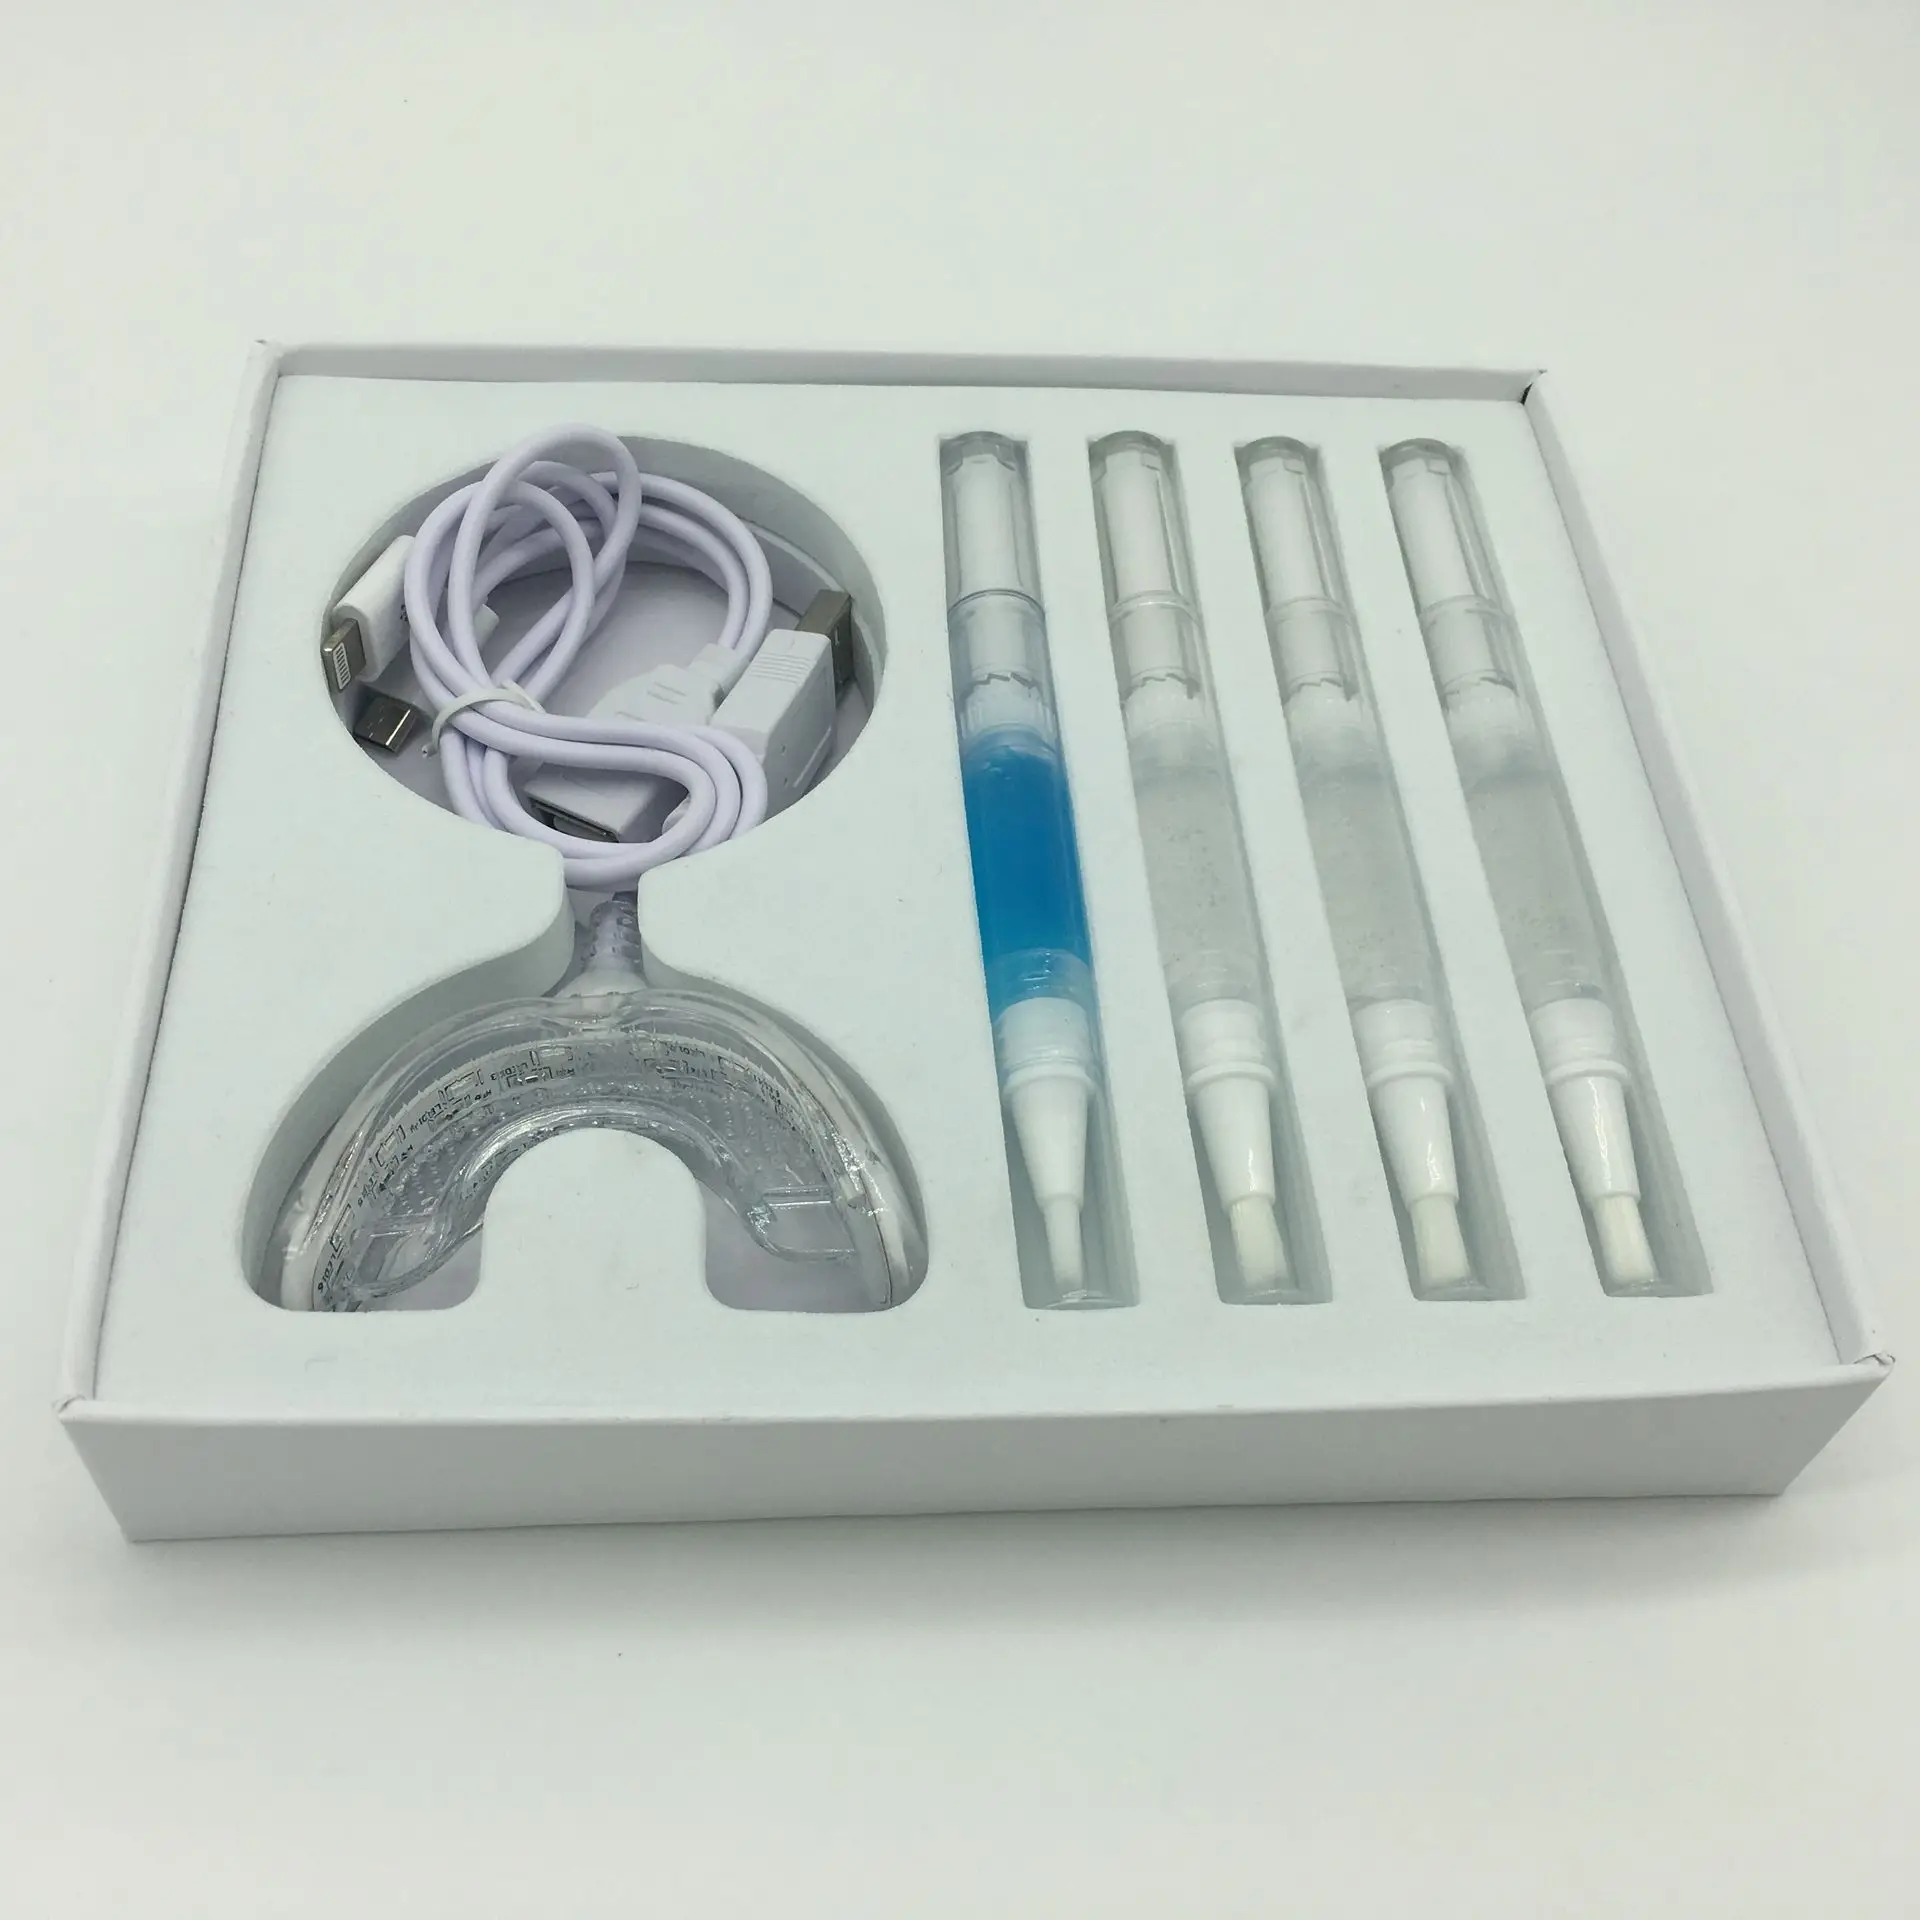 2020 approved teeth whitening kit with USB teeth whitening light